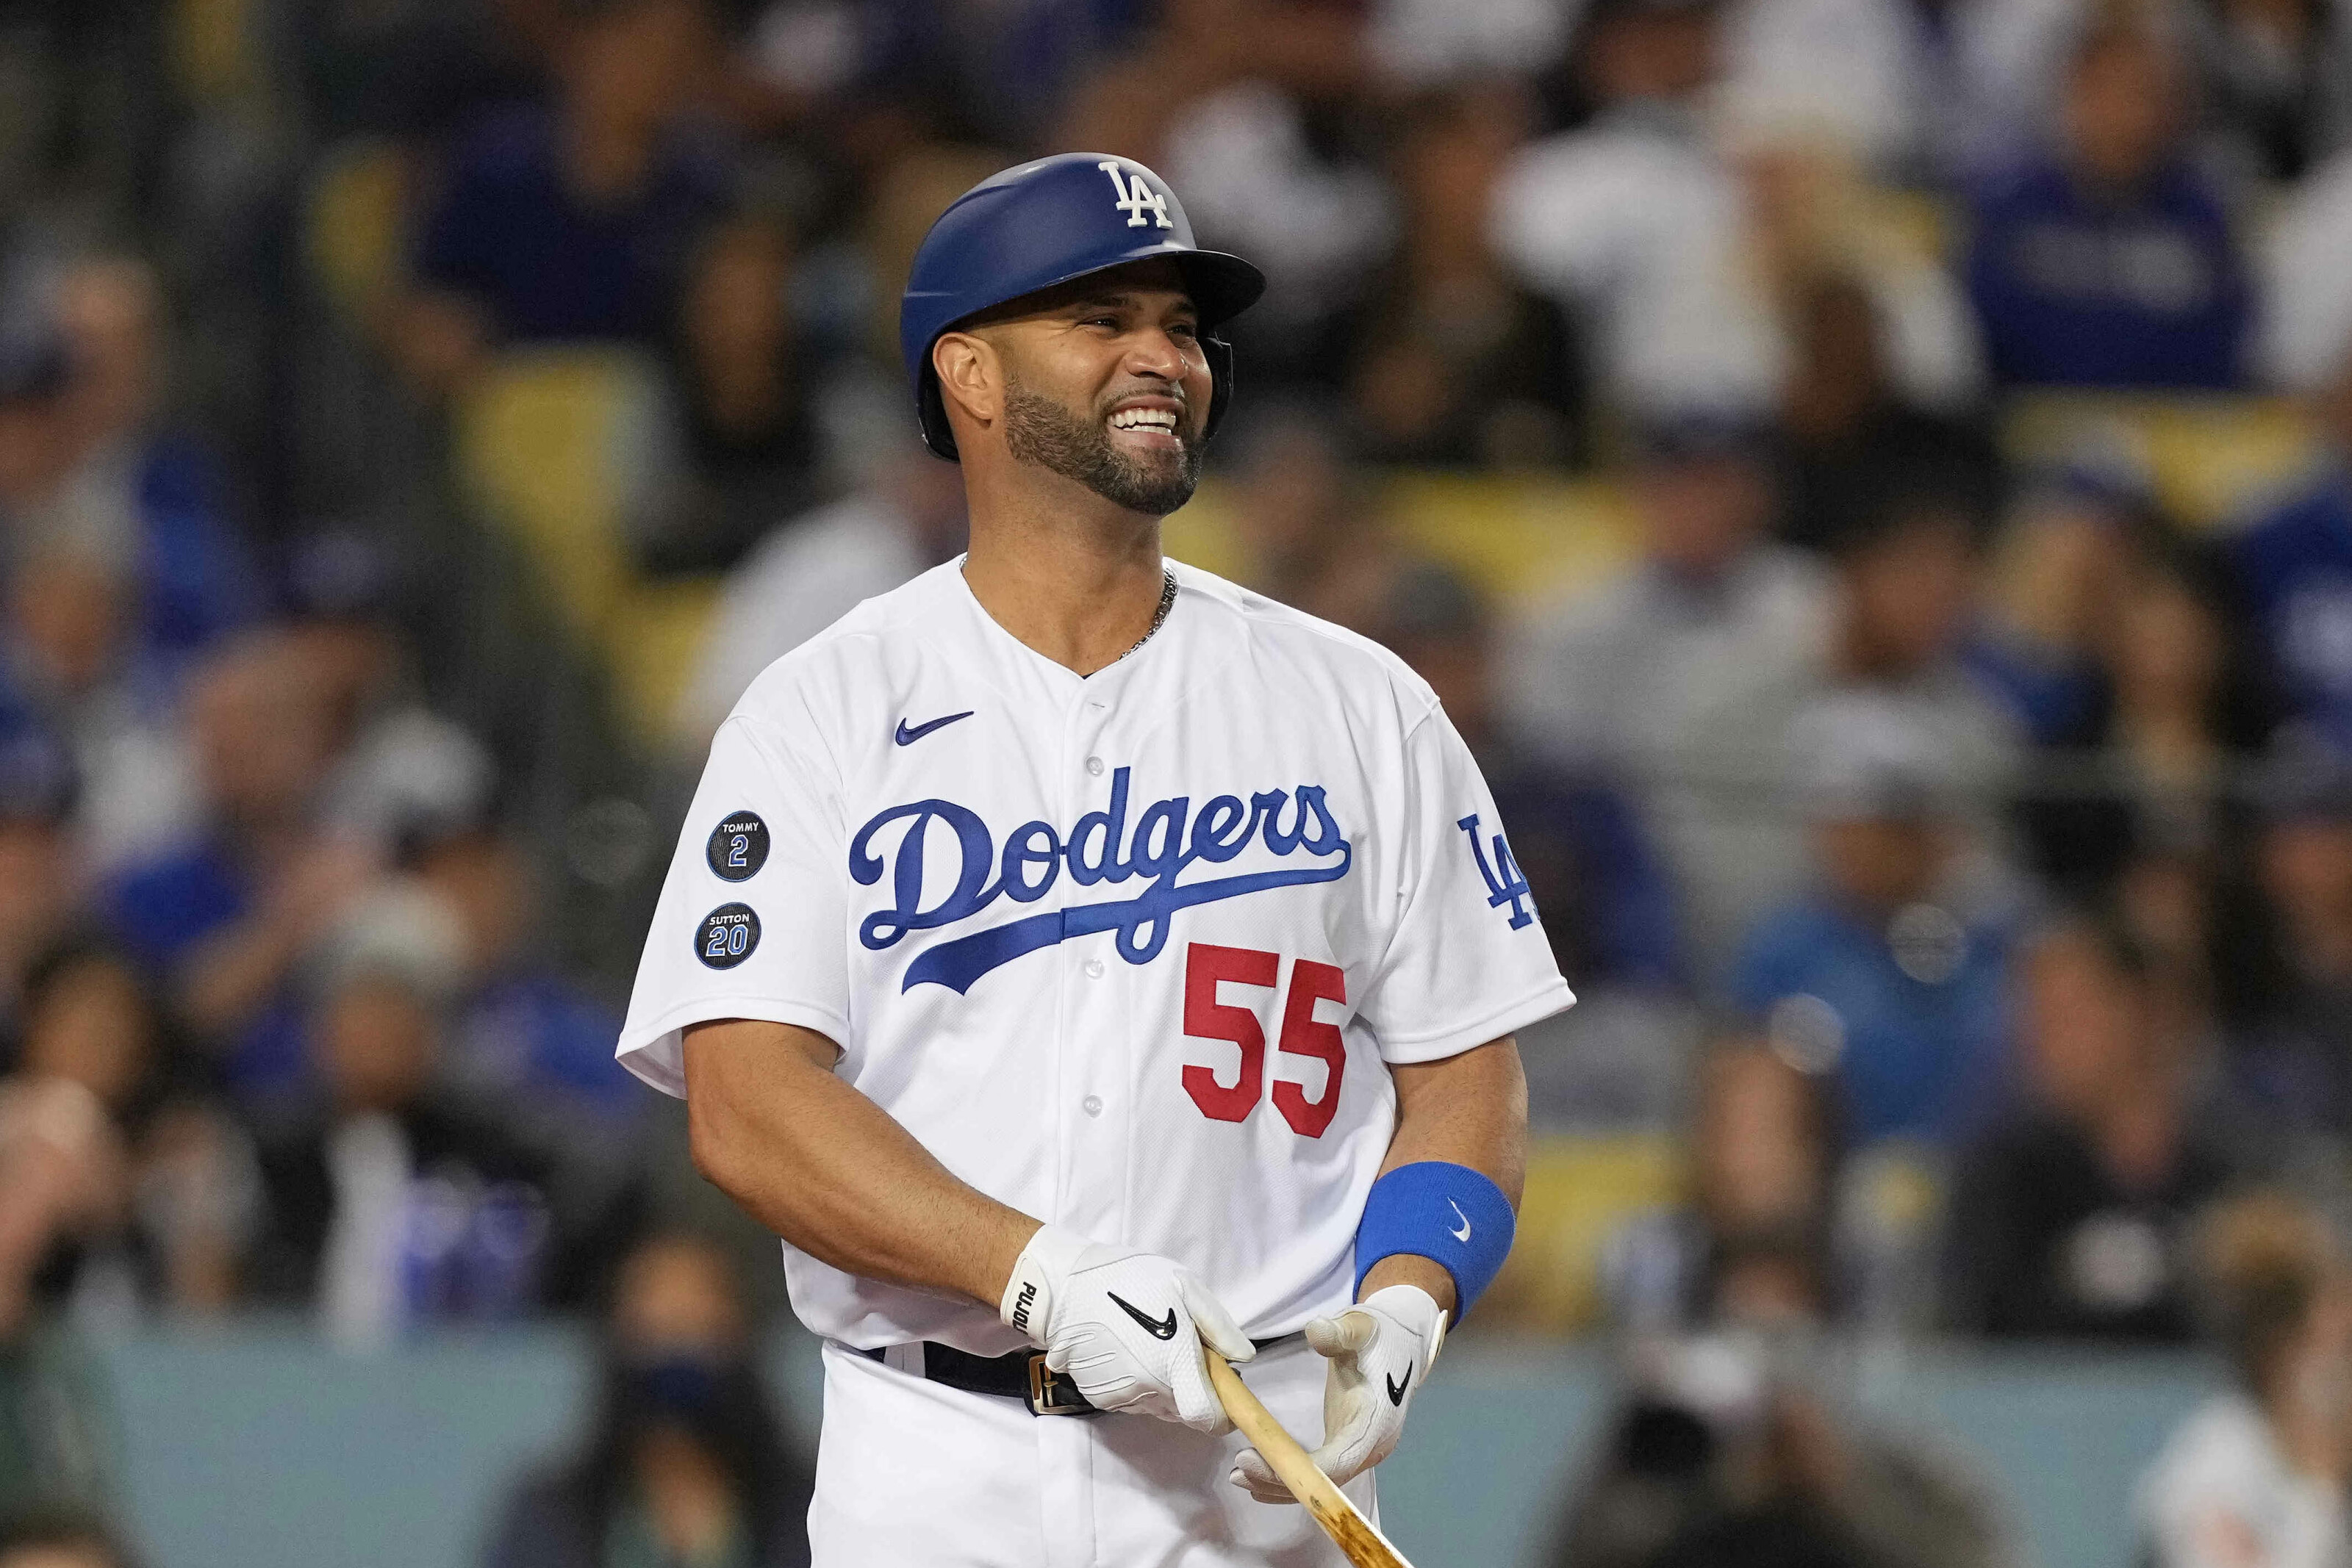 Albert Pujols finds a new major-league home, moving crosstown to